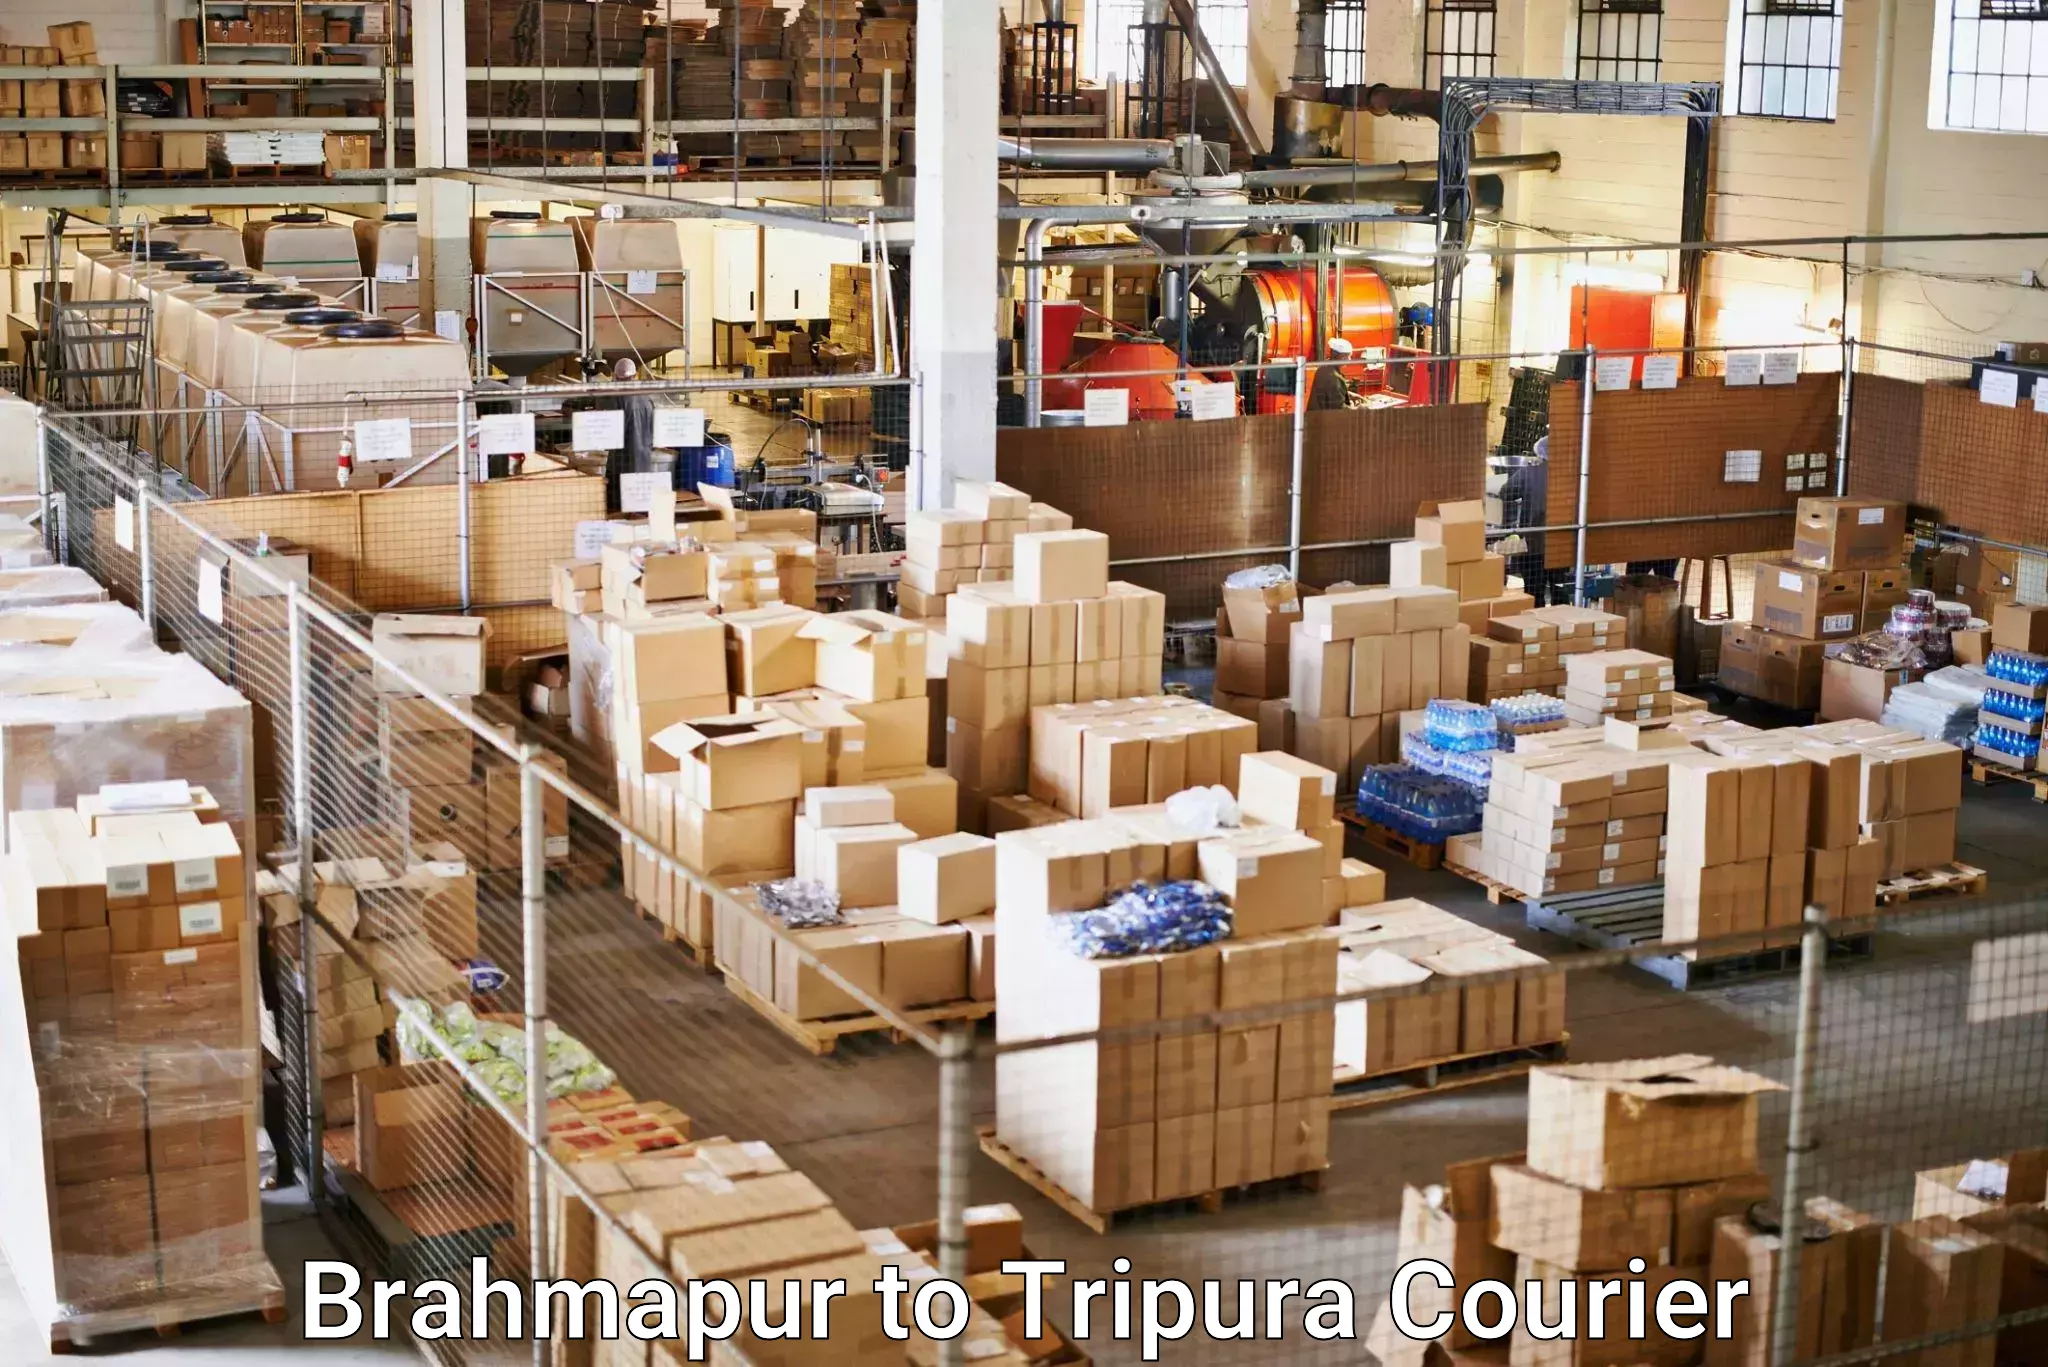 Advanced shipping services in Brahmapur to Udaipur Tripura